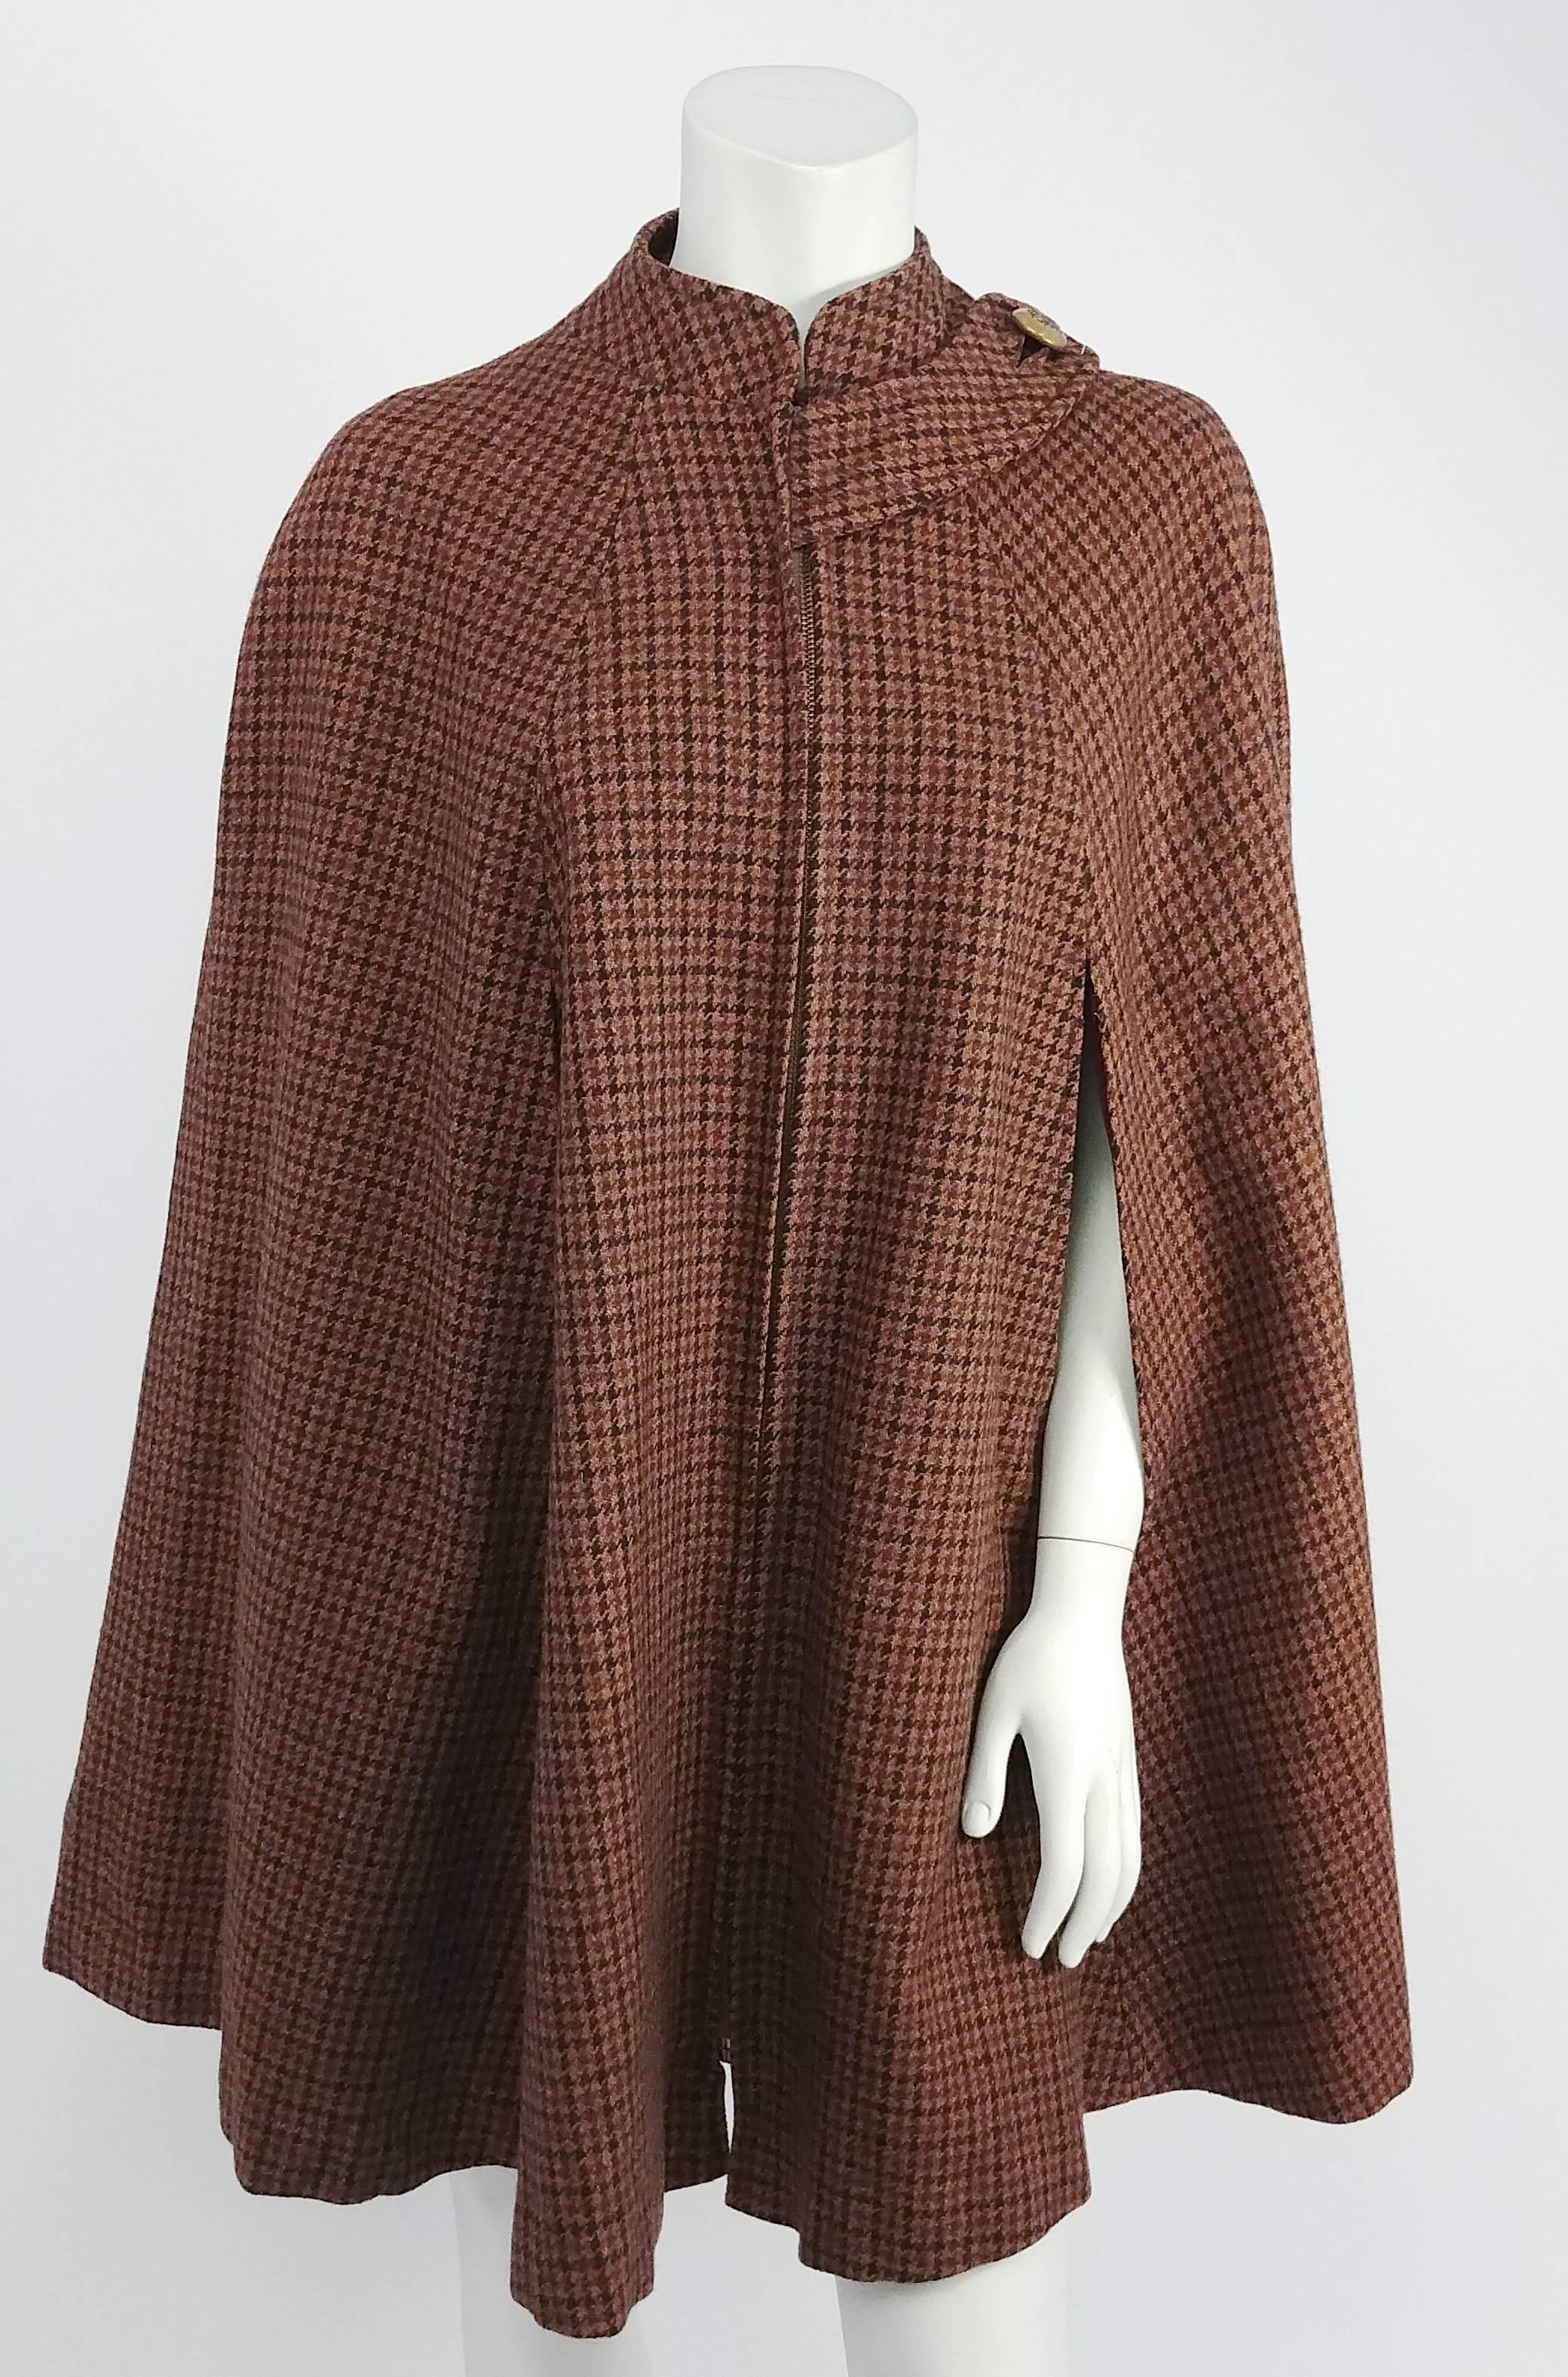 1960s Brown & Burgundy Houndstooth Wool Cape. Zips up front, buttons on one shoulder. Fully lined. Slits in front for arms. 